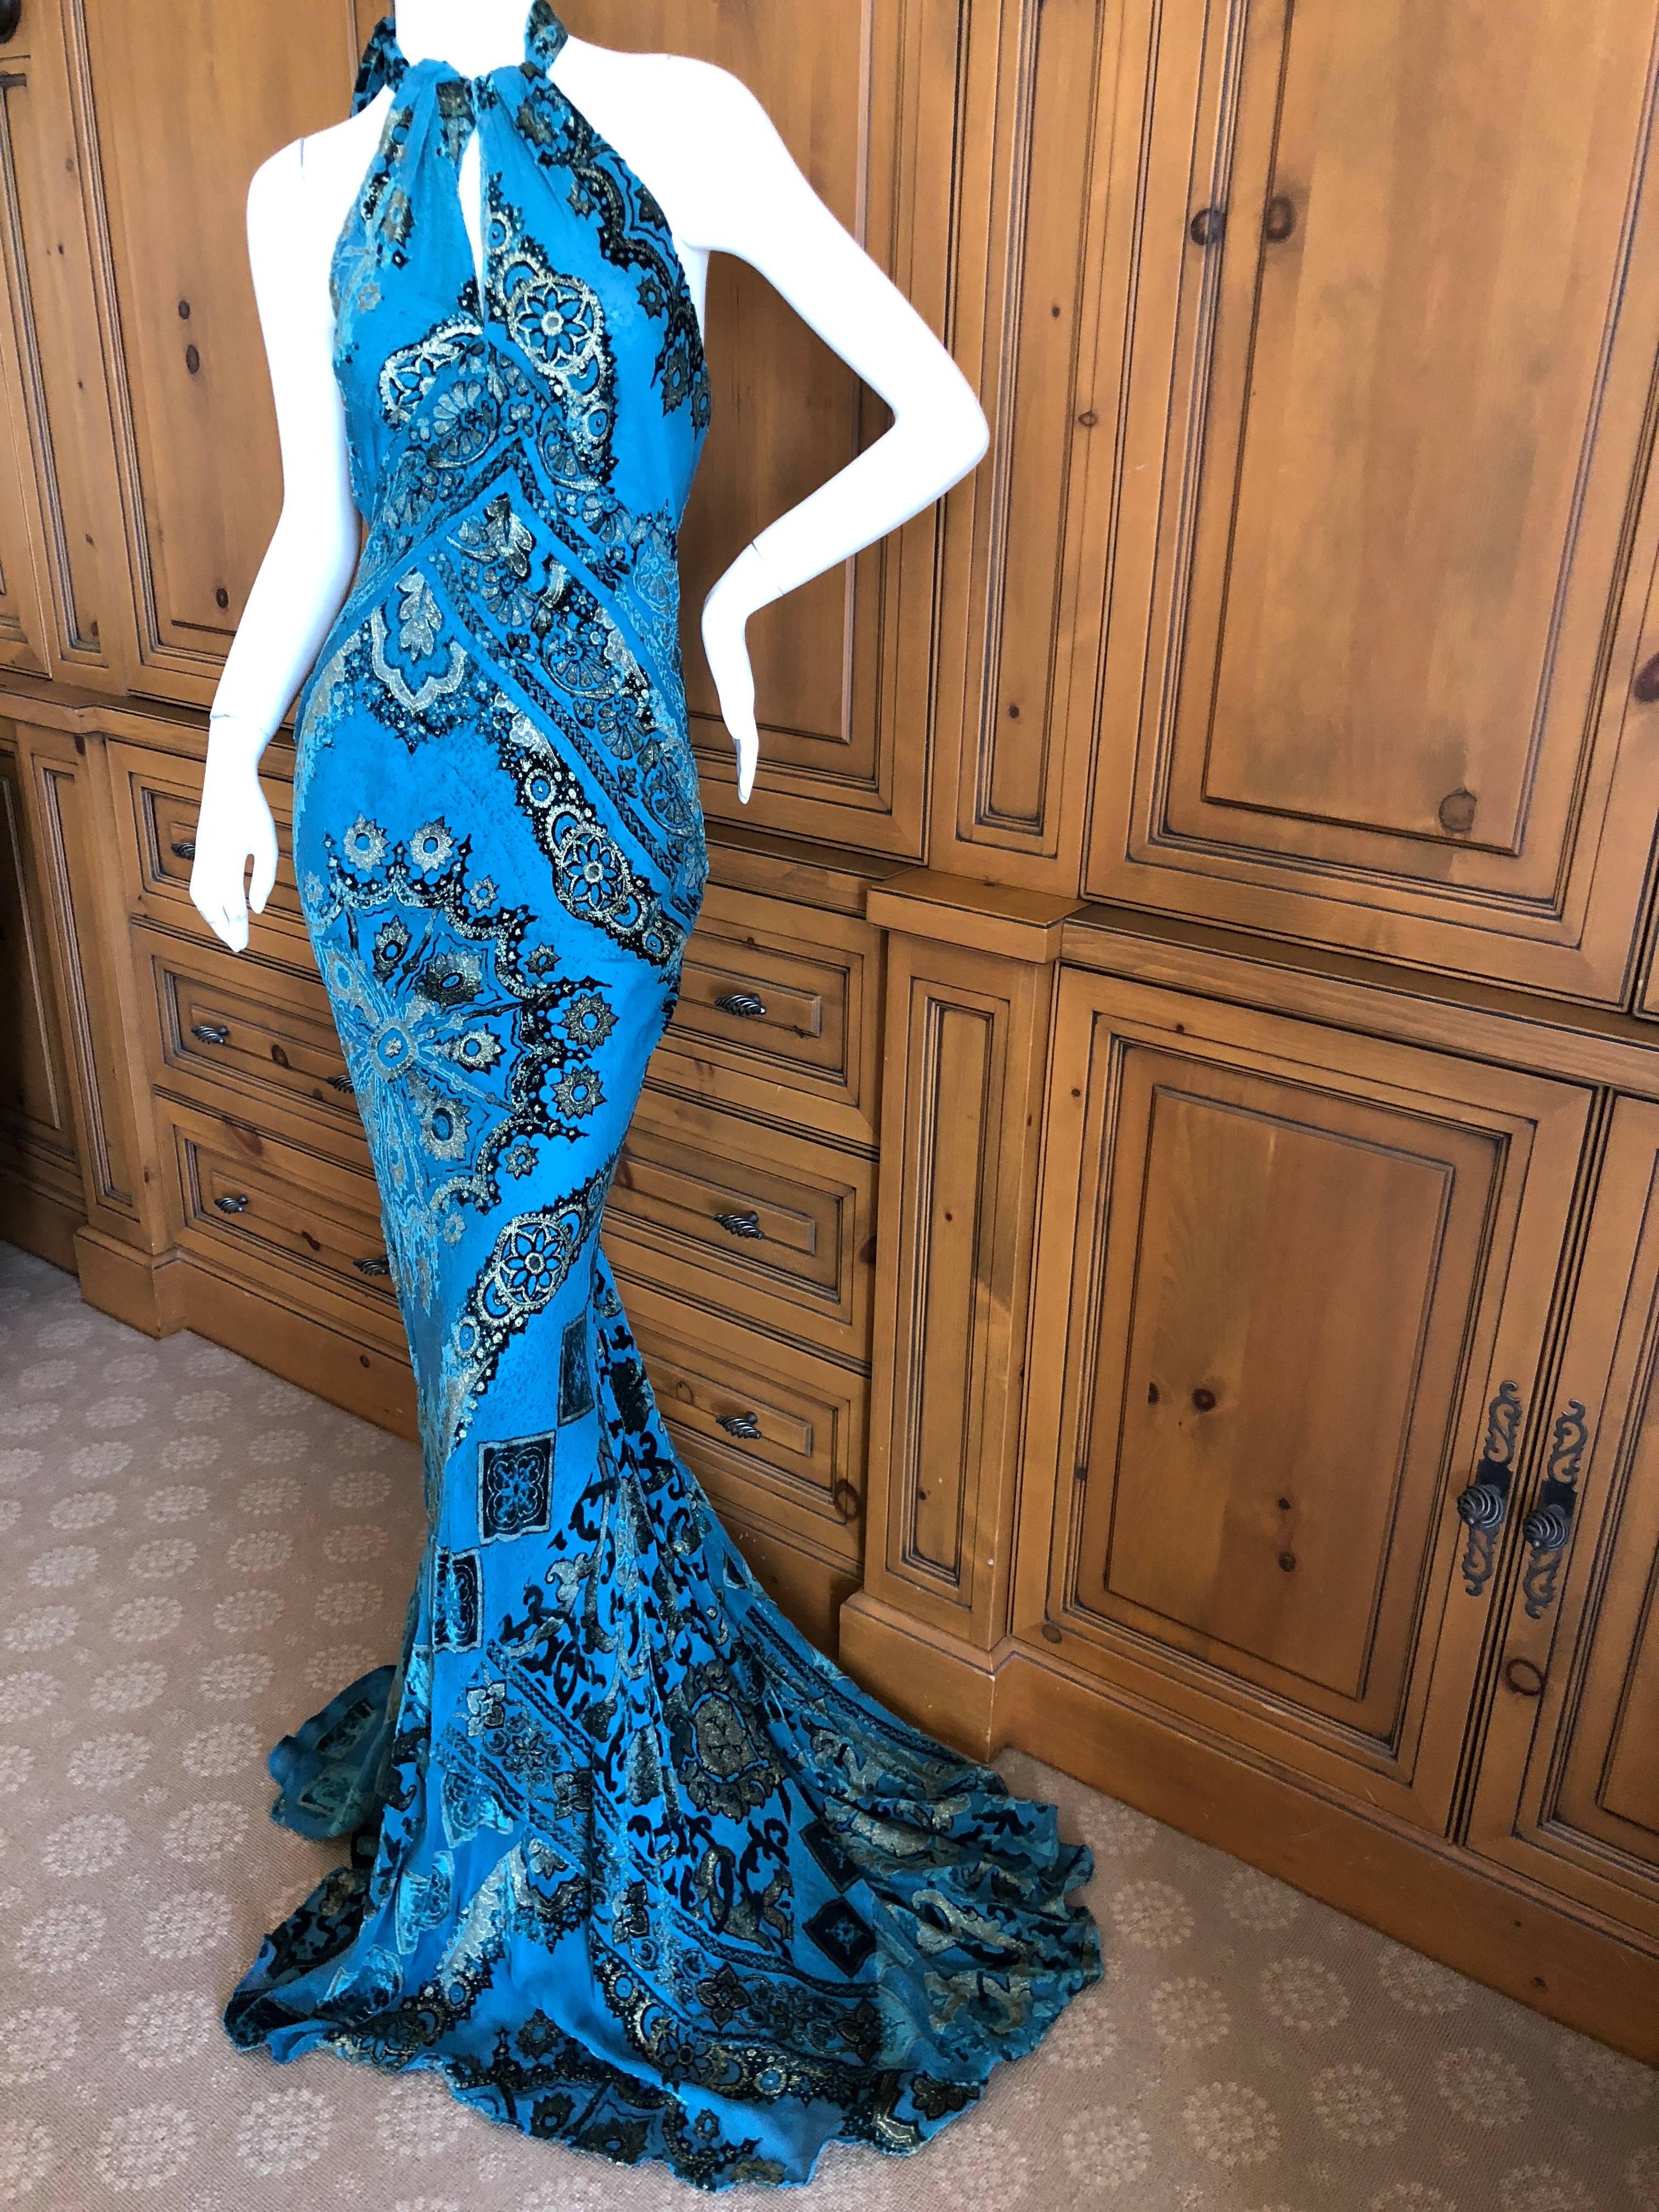 Roberto Cavalli Exceptional Gold Trim Halter Velvet Evening Dress with Full Train.

It is a peacock blue with gold, very Fortuny .

Size M

Bust  38" 

Waist 34" 

Hips 44' 

Length 70"

 Excellent condition
